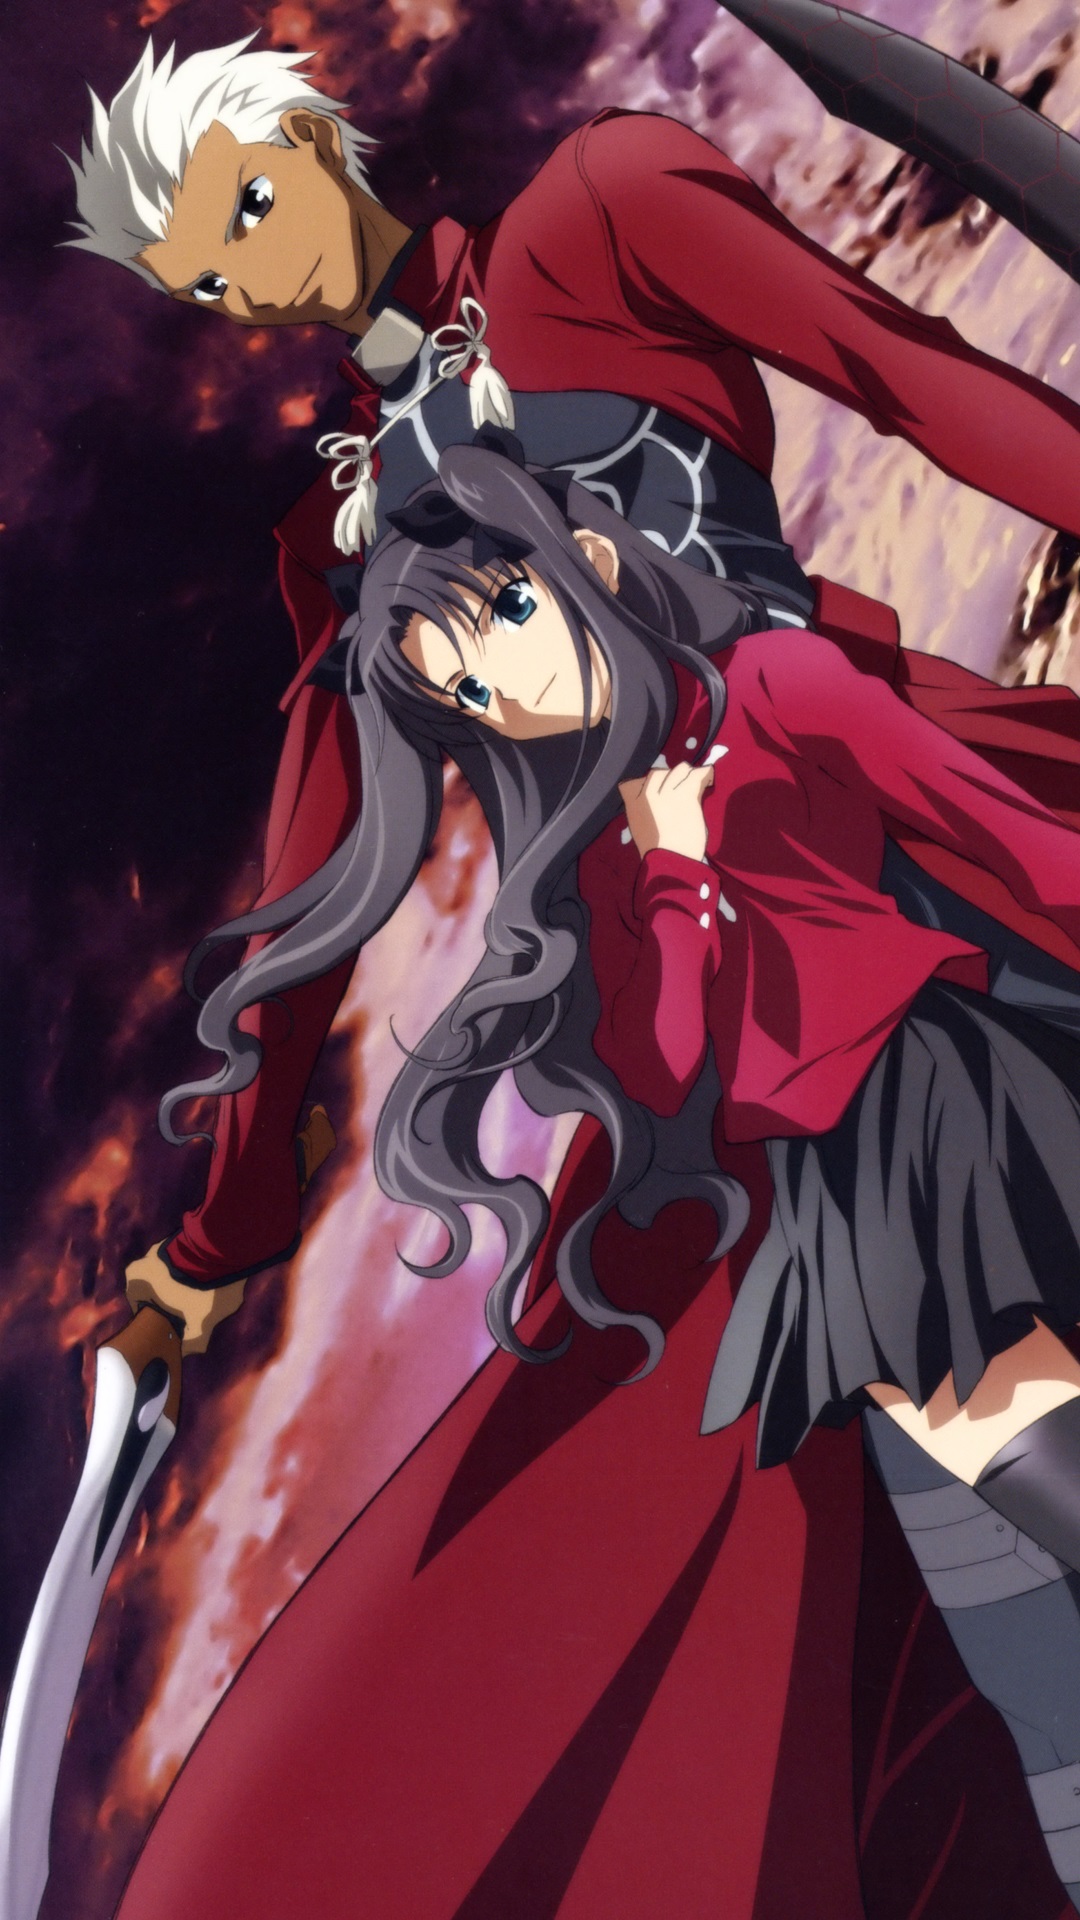 Fate Stay Night Unlimited Blade Works Rin Tohsaka Archer Fate Stay Night Wallpaper Android 1080x19 Wallpaper Teahub Io